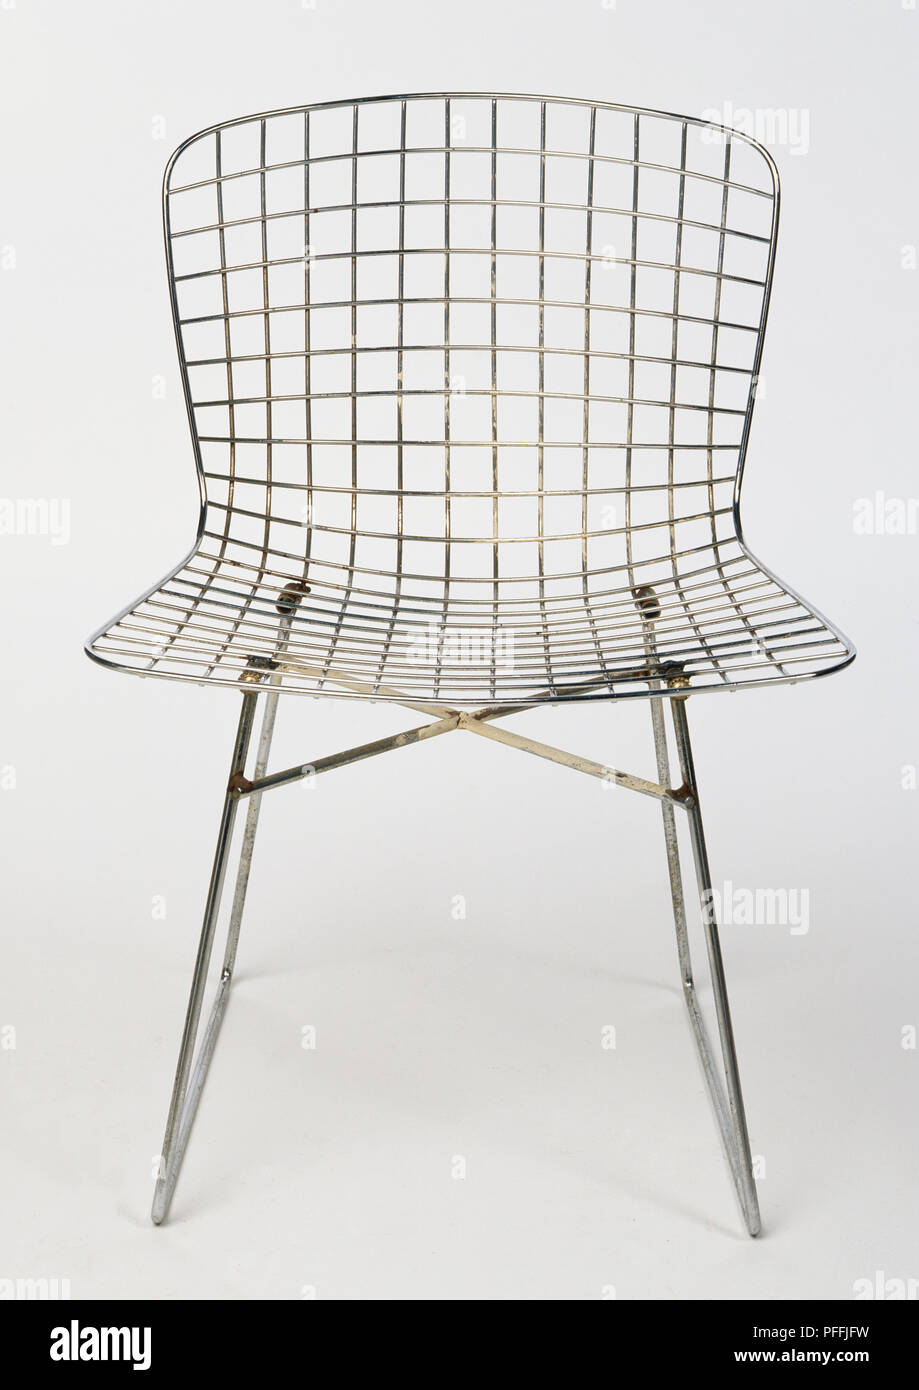 Metal mesh 1950s chair, designed by Italian Harry Bertoia, in classic curved retro-style. Stock Photo